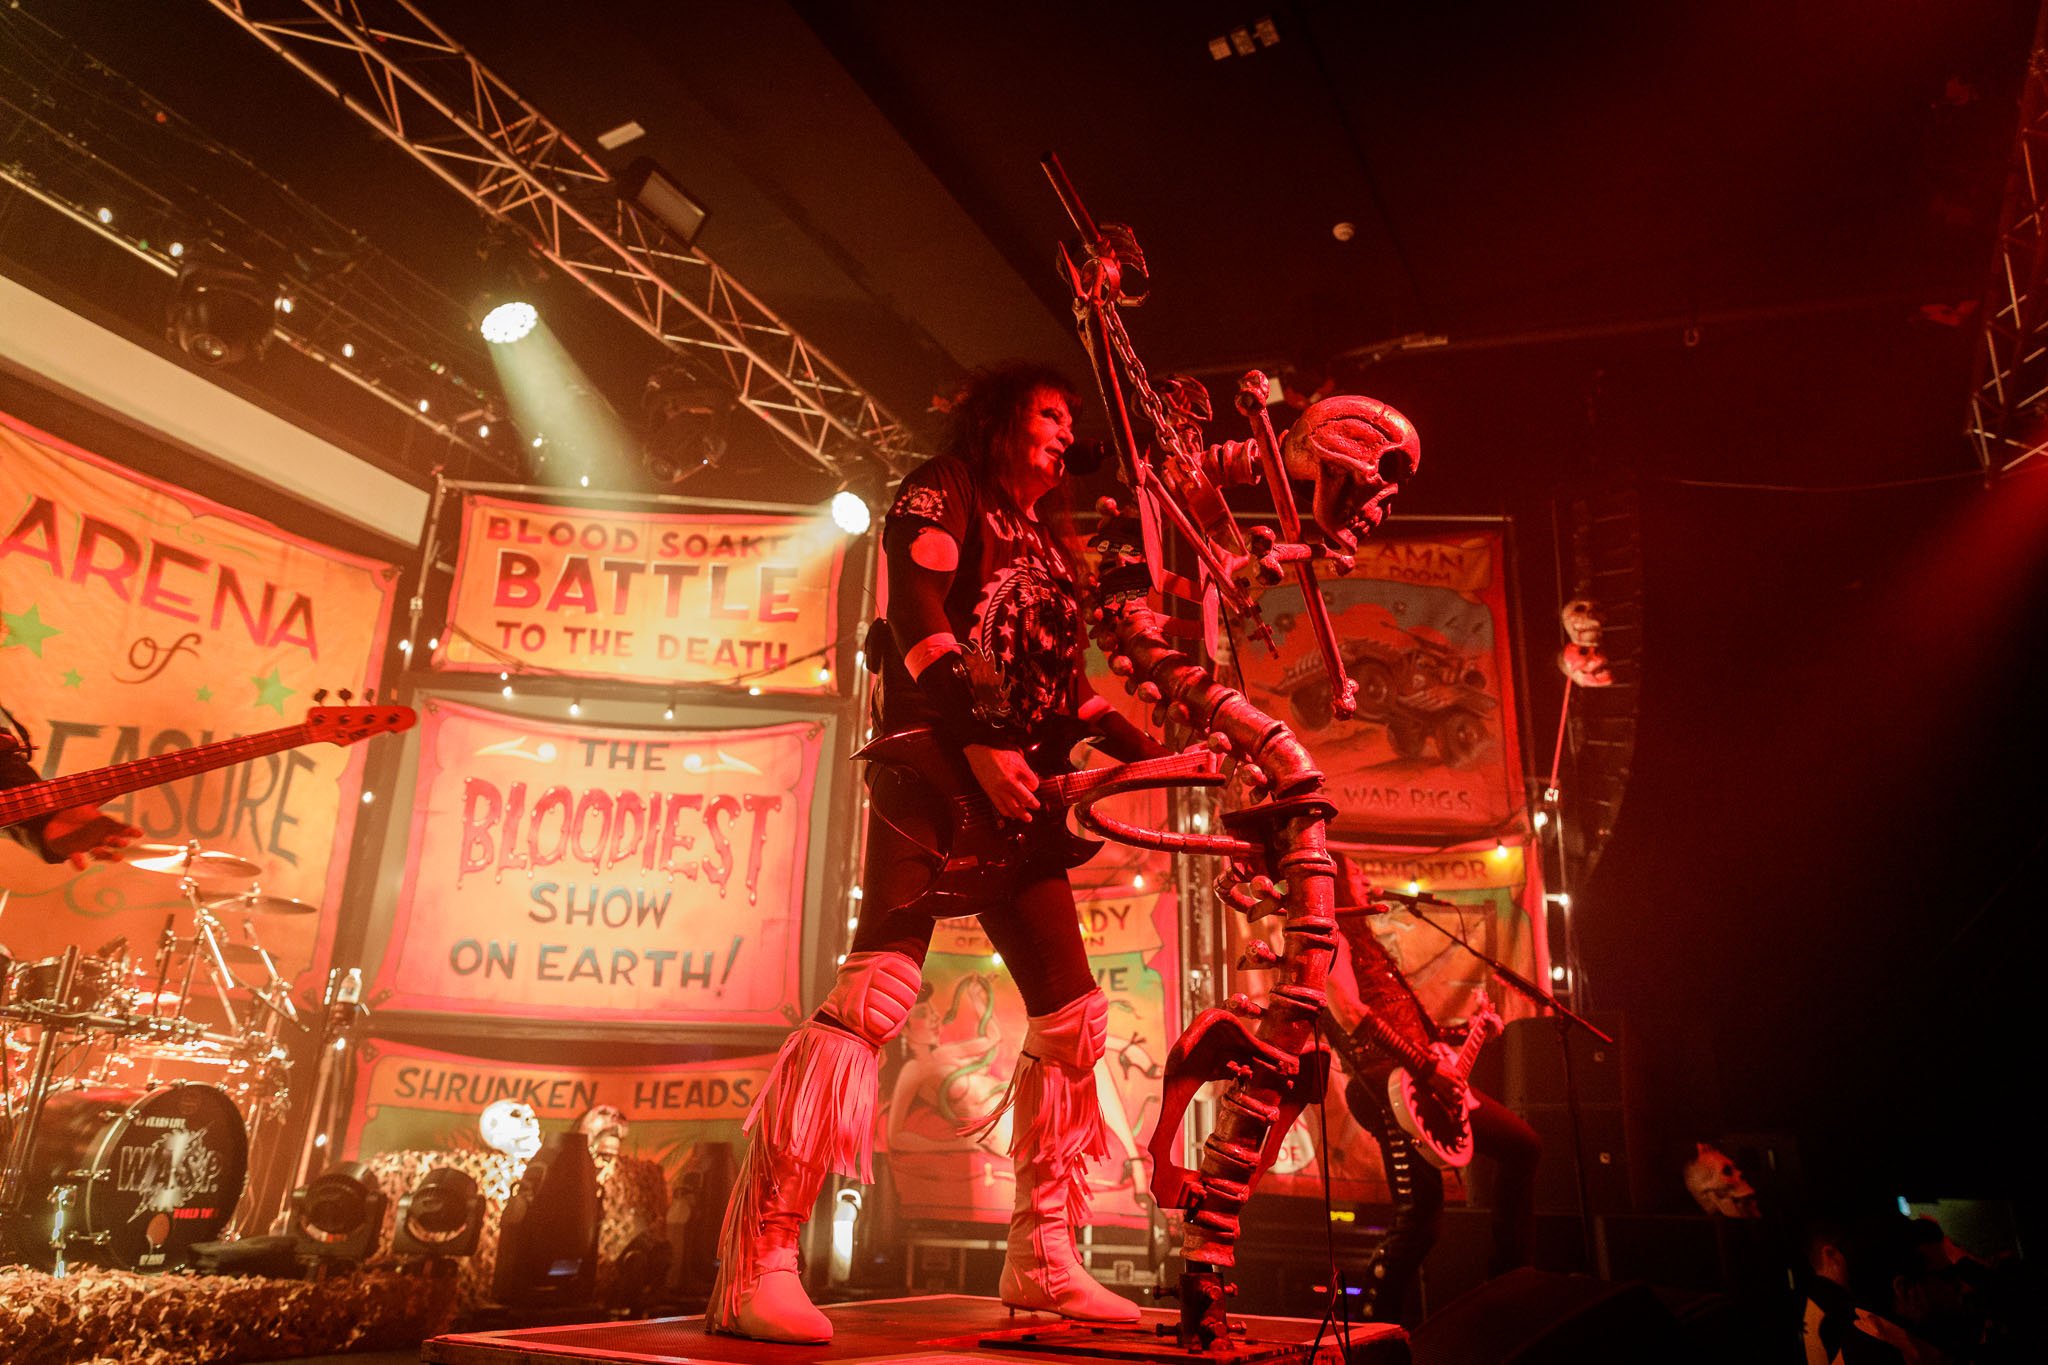 W.A.S.P. at the Academy in Manchester on March 17th 2023 ©Johann Wierzbicki